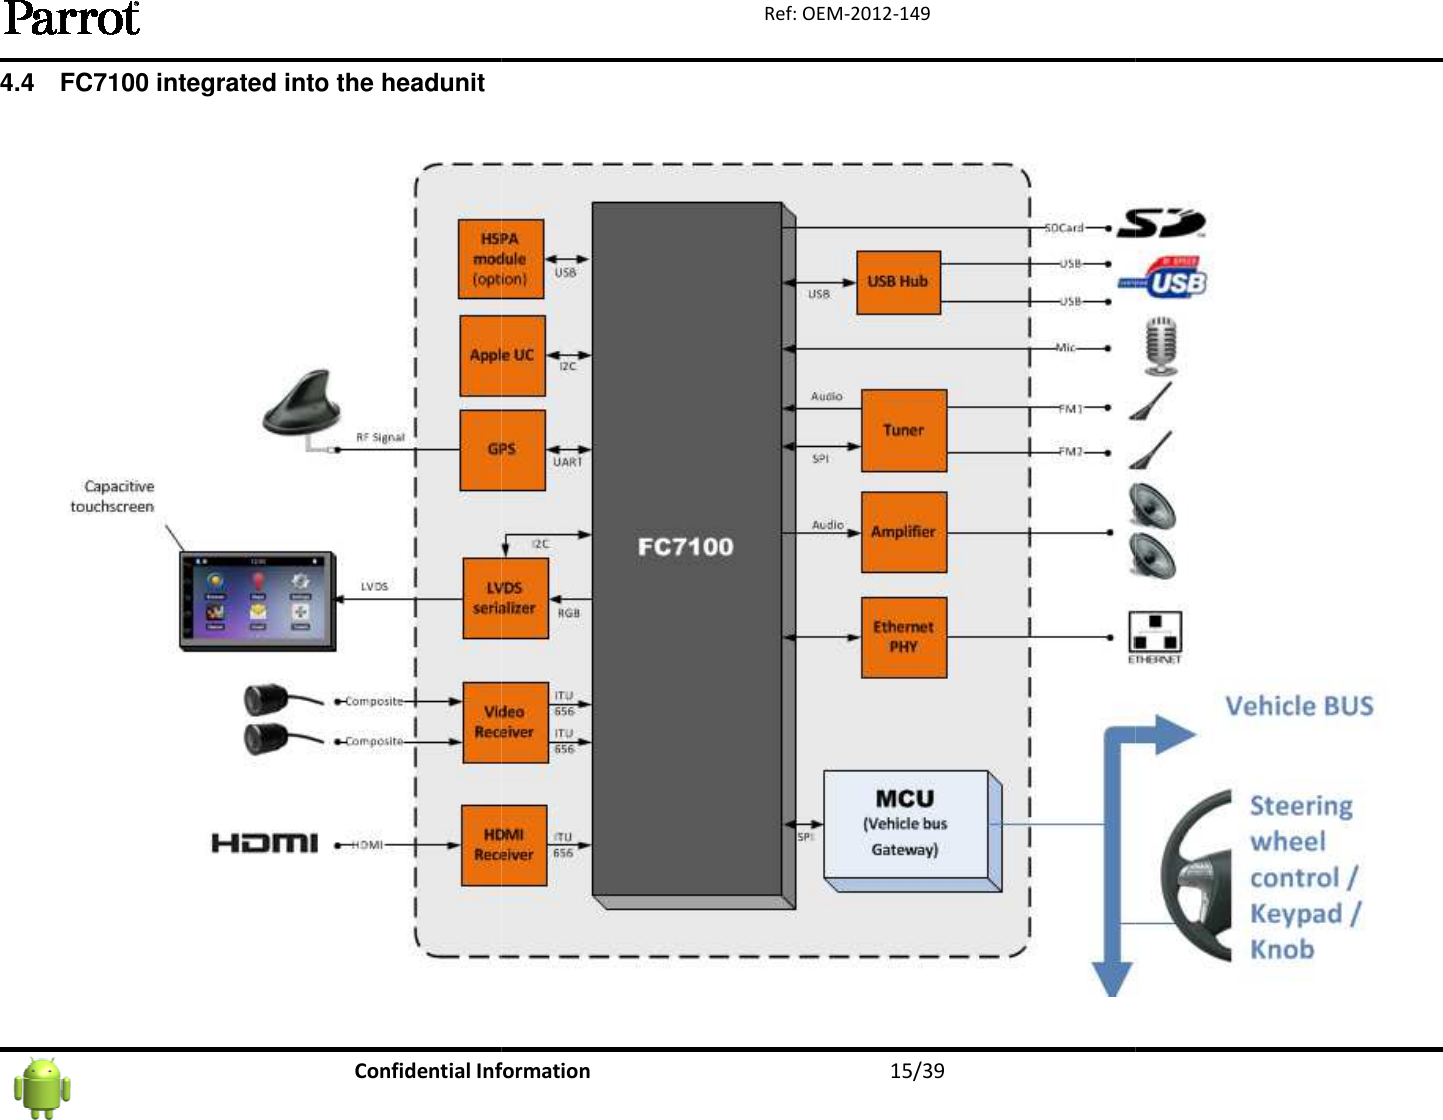   Confidential Information4.4  FC7100 integrated into the headunit Information 15/39 Ref: OEM-2012-149     